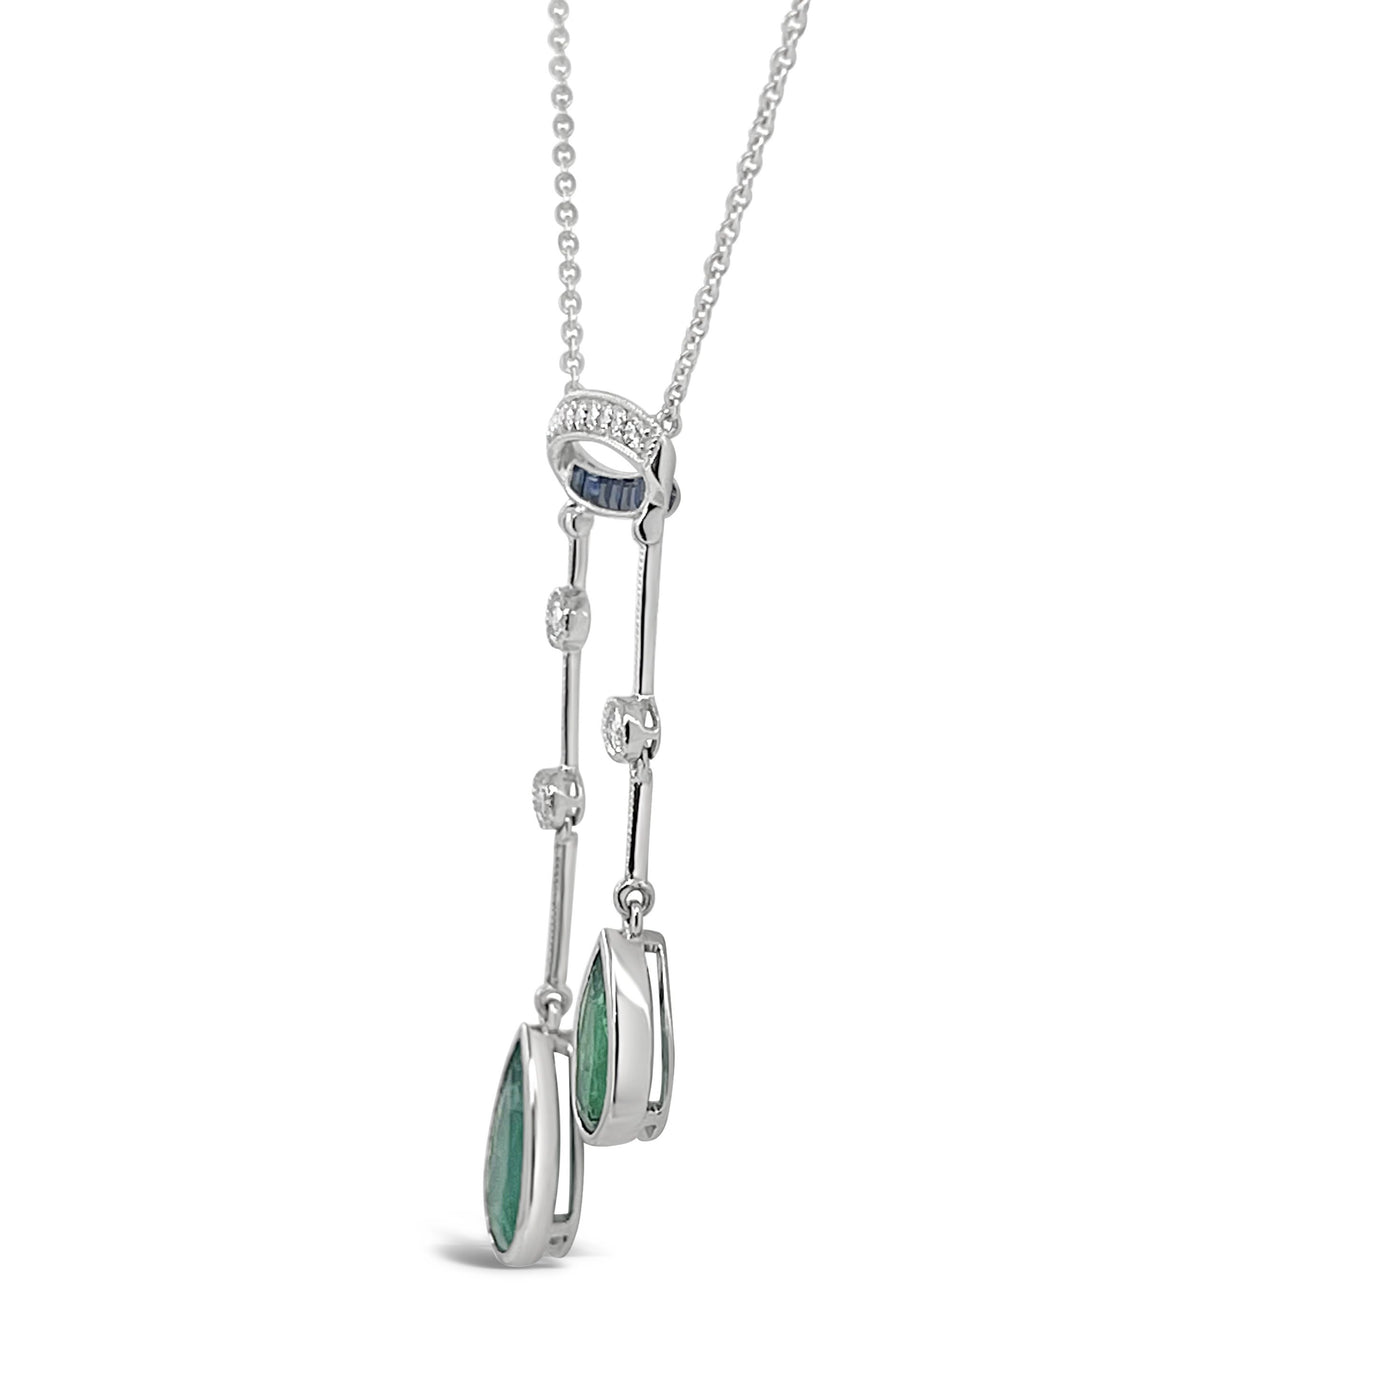 18CT White Gold Colombian Emerald and Diamond Necklace